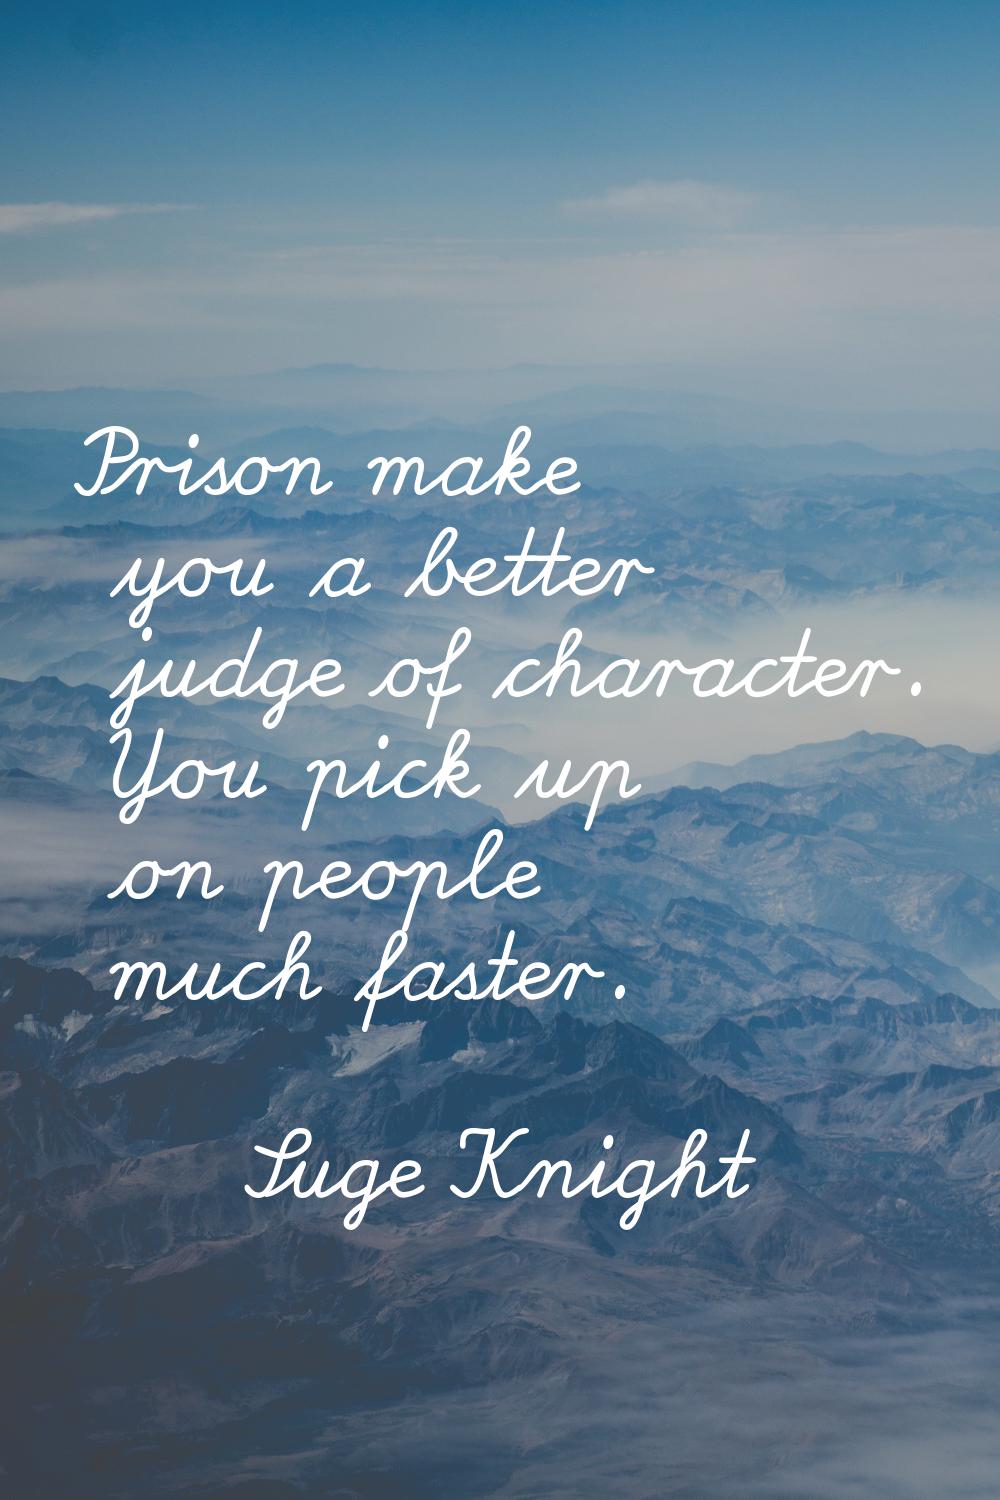 Prison make you a better judge of character. You pick up on people much faster.